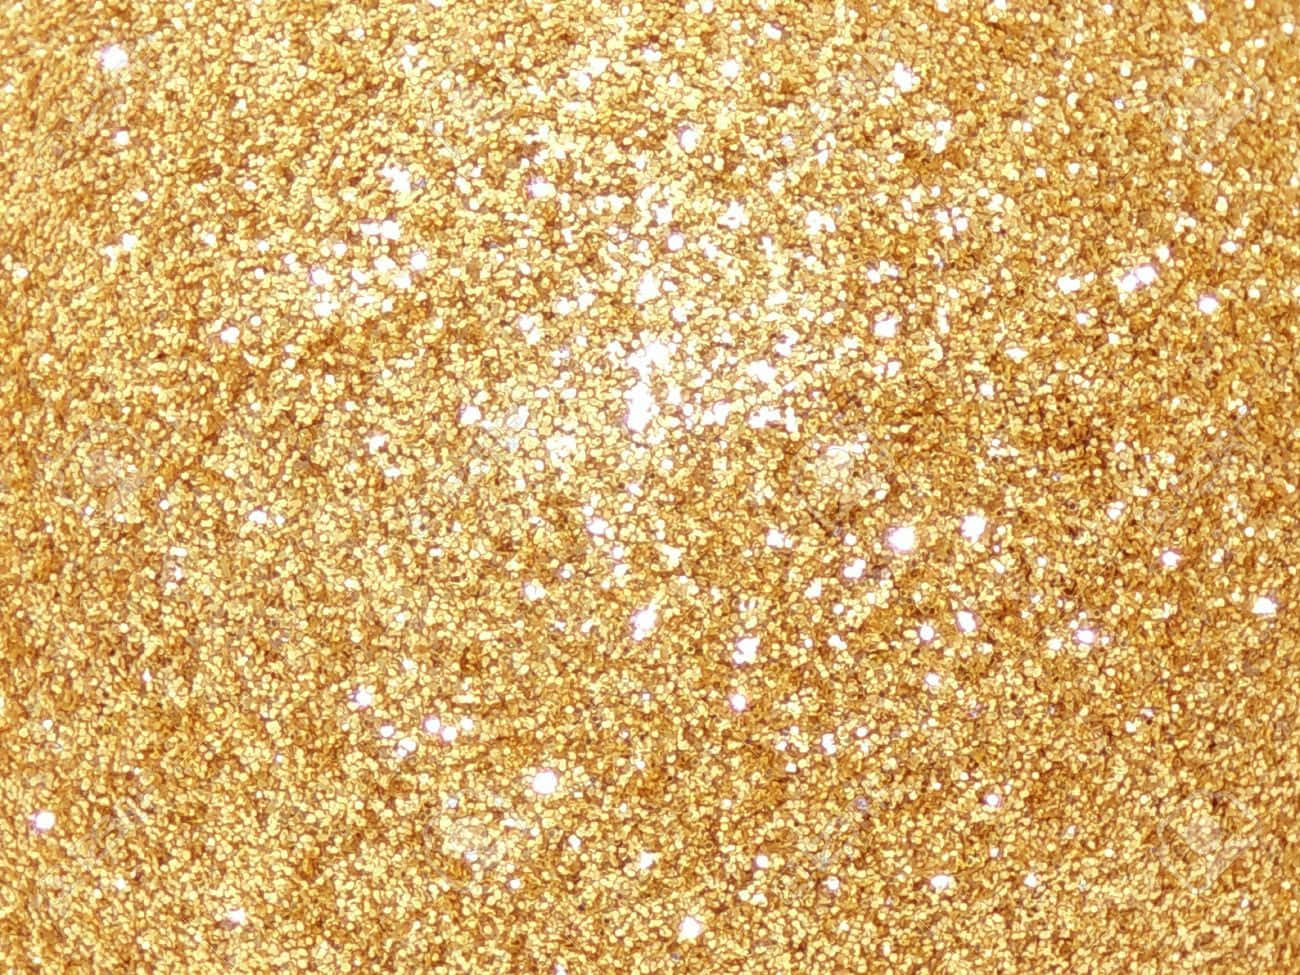 Discover the finishing touch of luxury with a gold glitter background